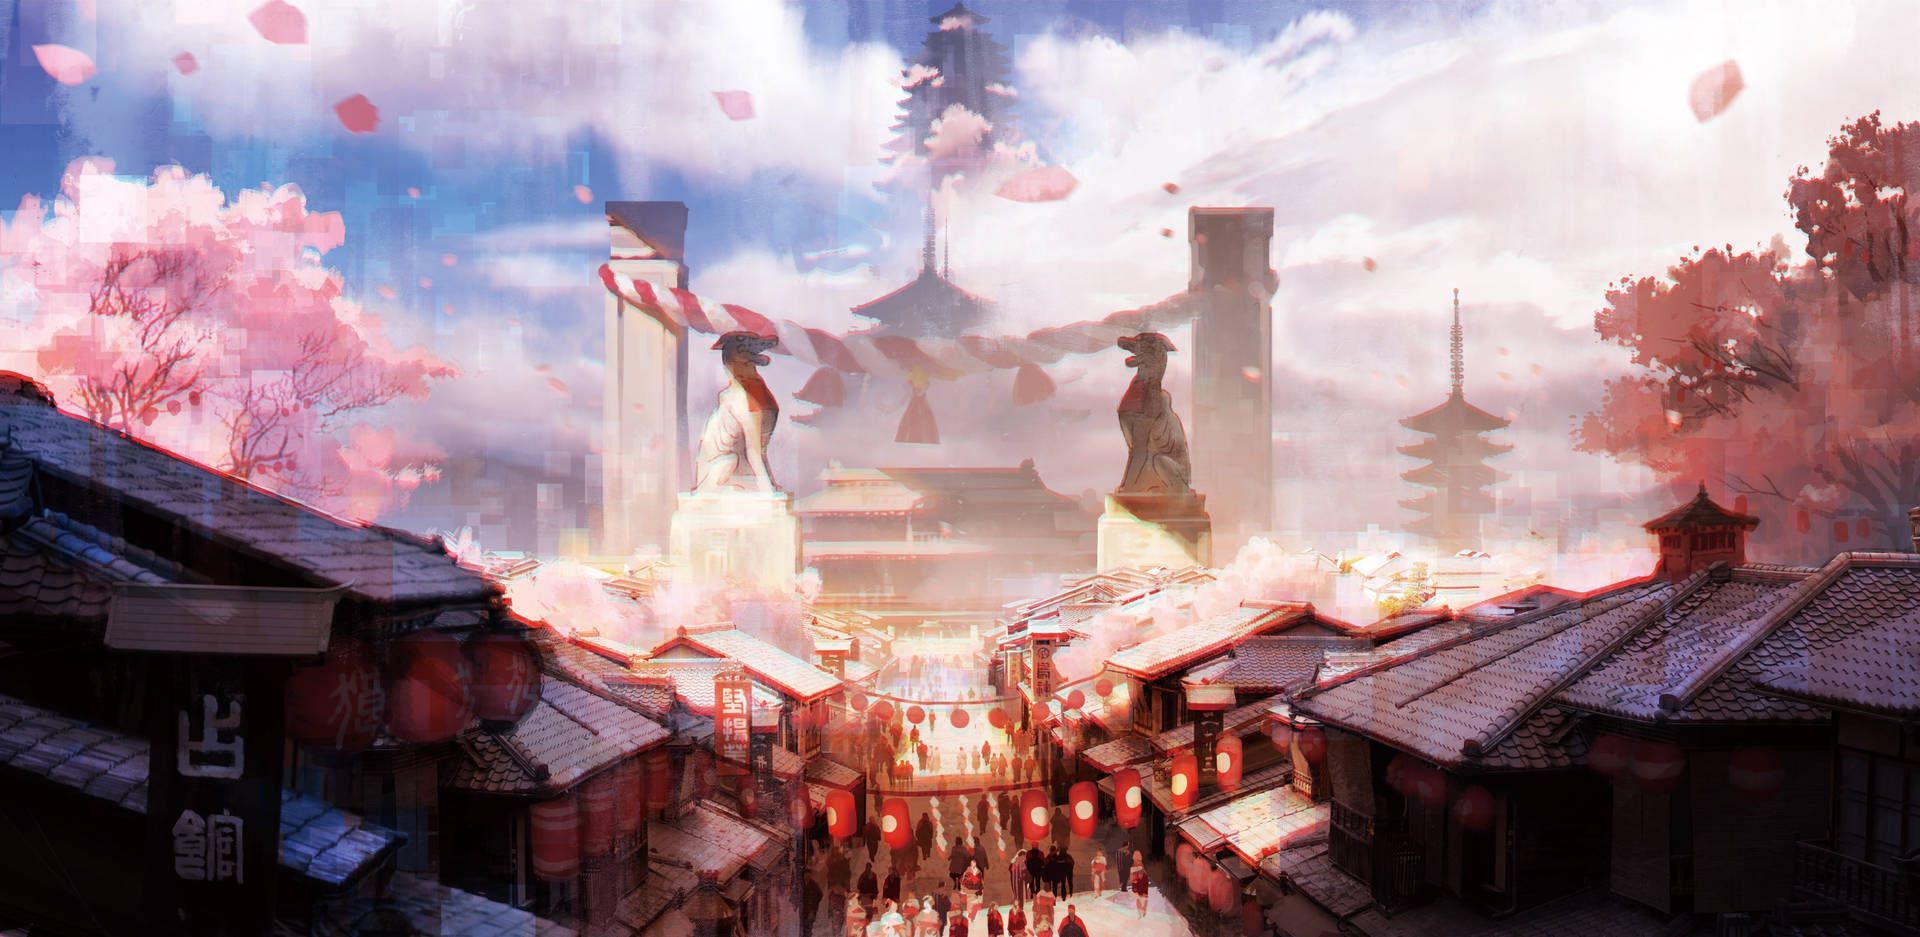 A digital painting of a Japanese village with cherry blossoms - Anime city, Japanese